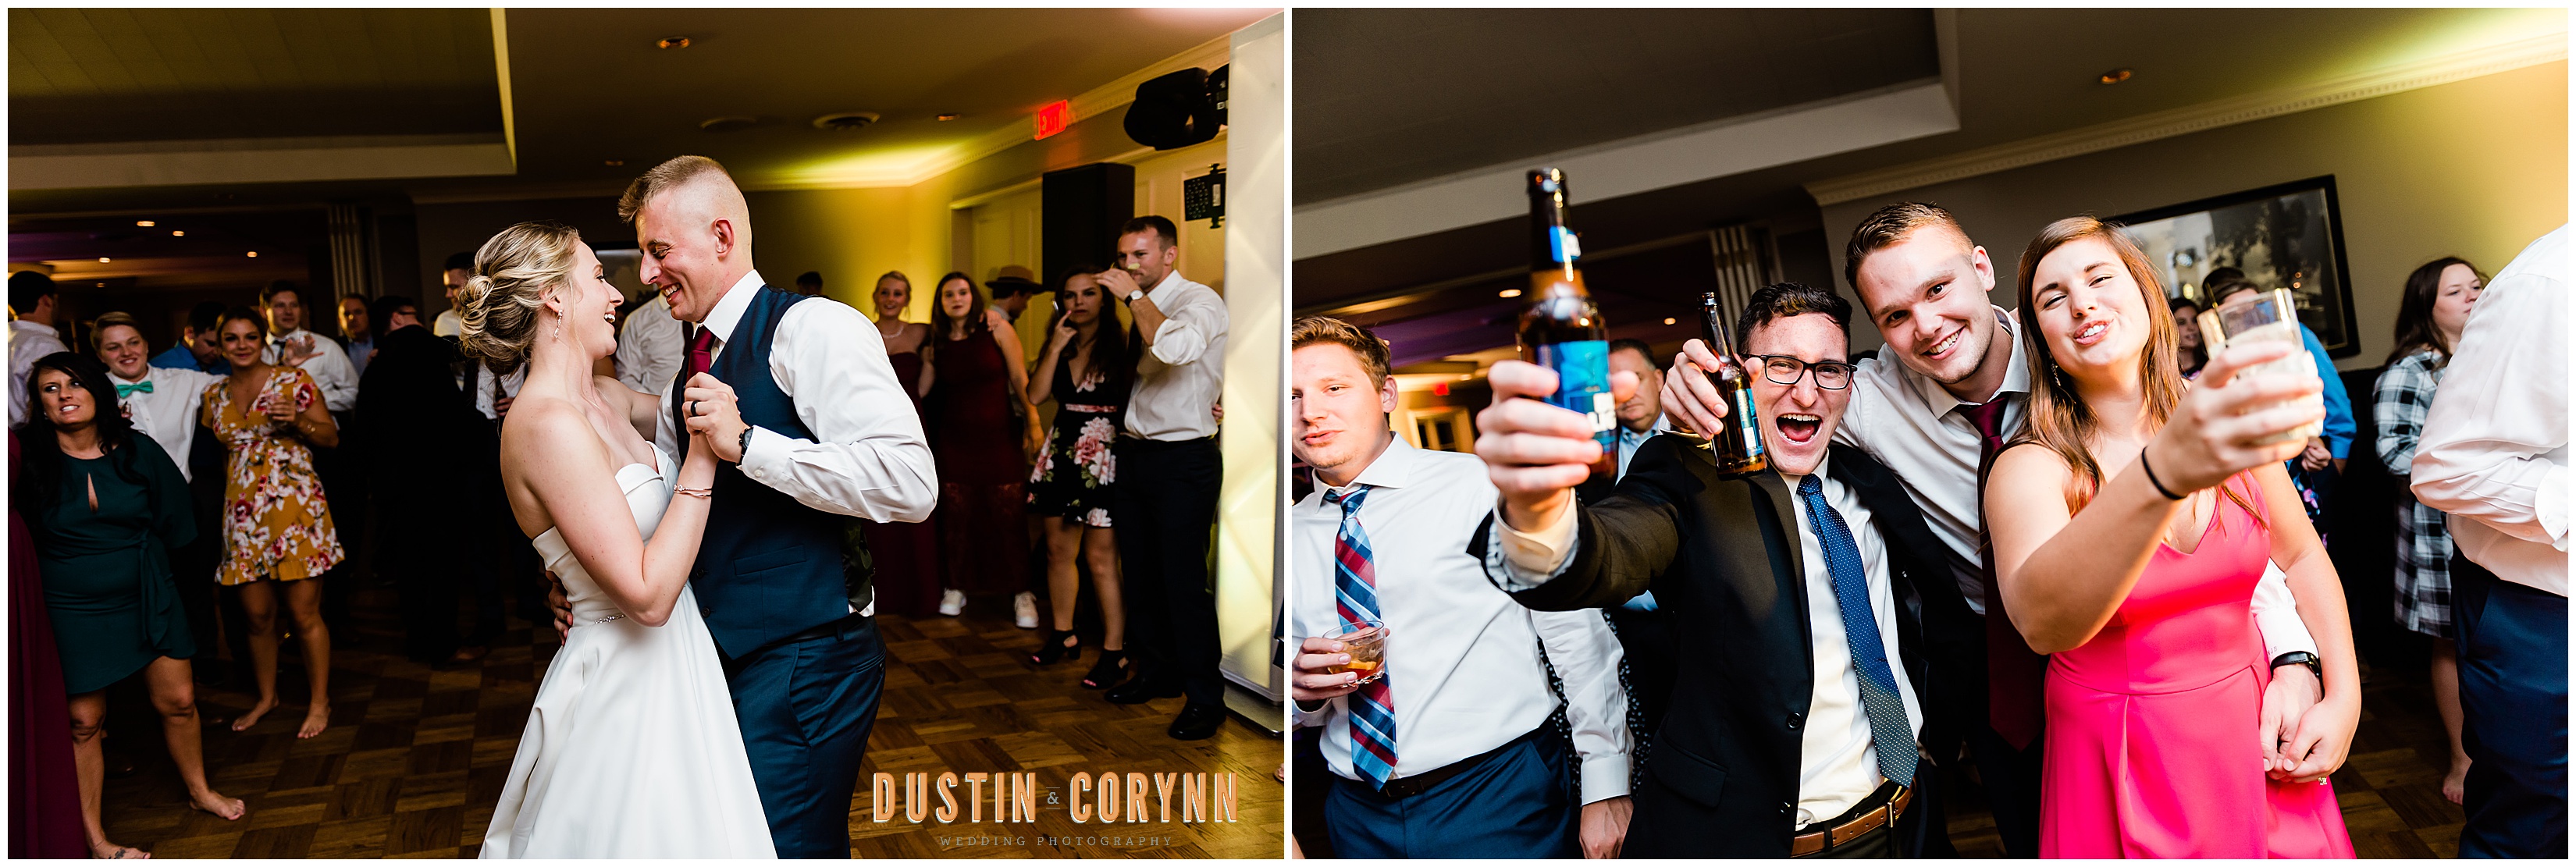 Reception and Dancing at Fort Wayne Country Club Wedding